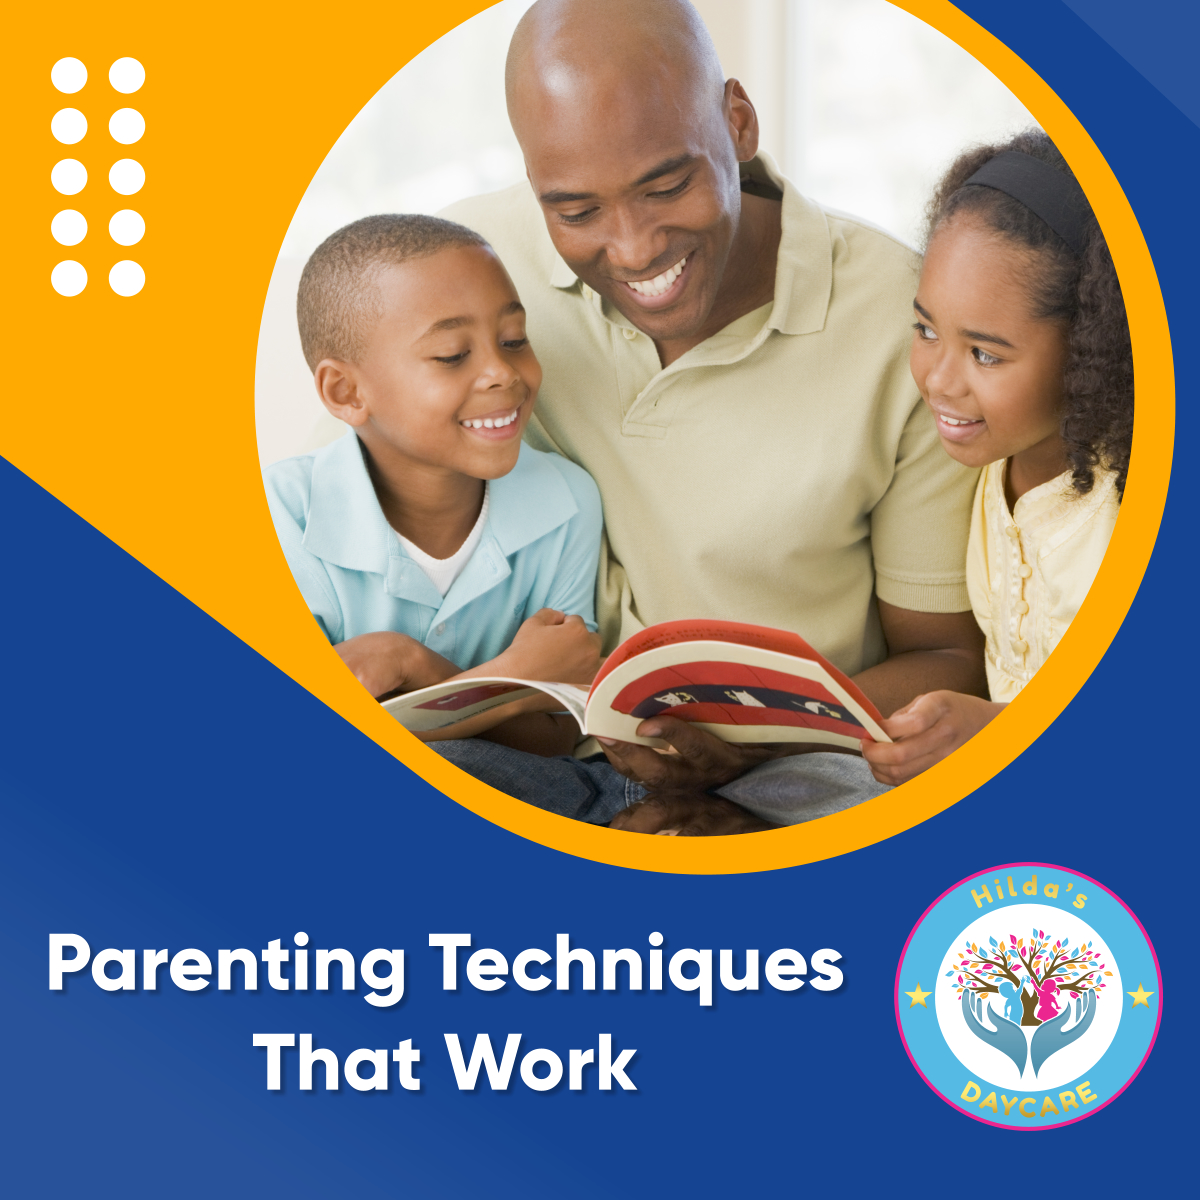 Here are some helpful strategies for promoting your child's healthy development:

- Demonstrate some warmth and sympathy

- Read, speak, and share books with them

Read more: facebook.com/permalink.php?…

#DalyCityCA #Daycare #ParentingTechniques #Healthy #Safe